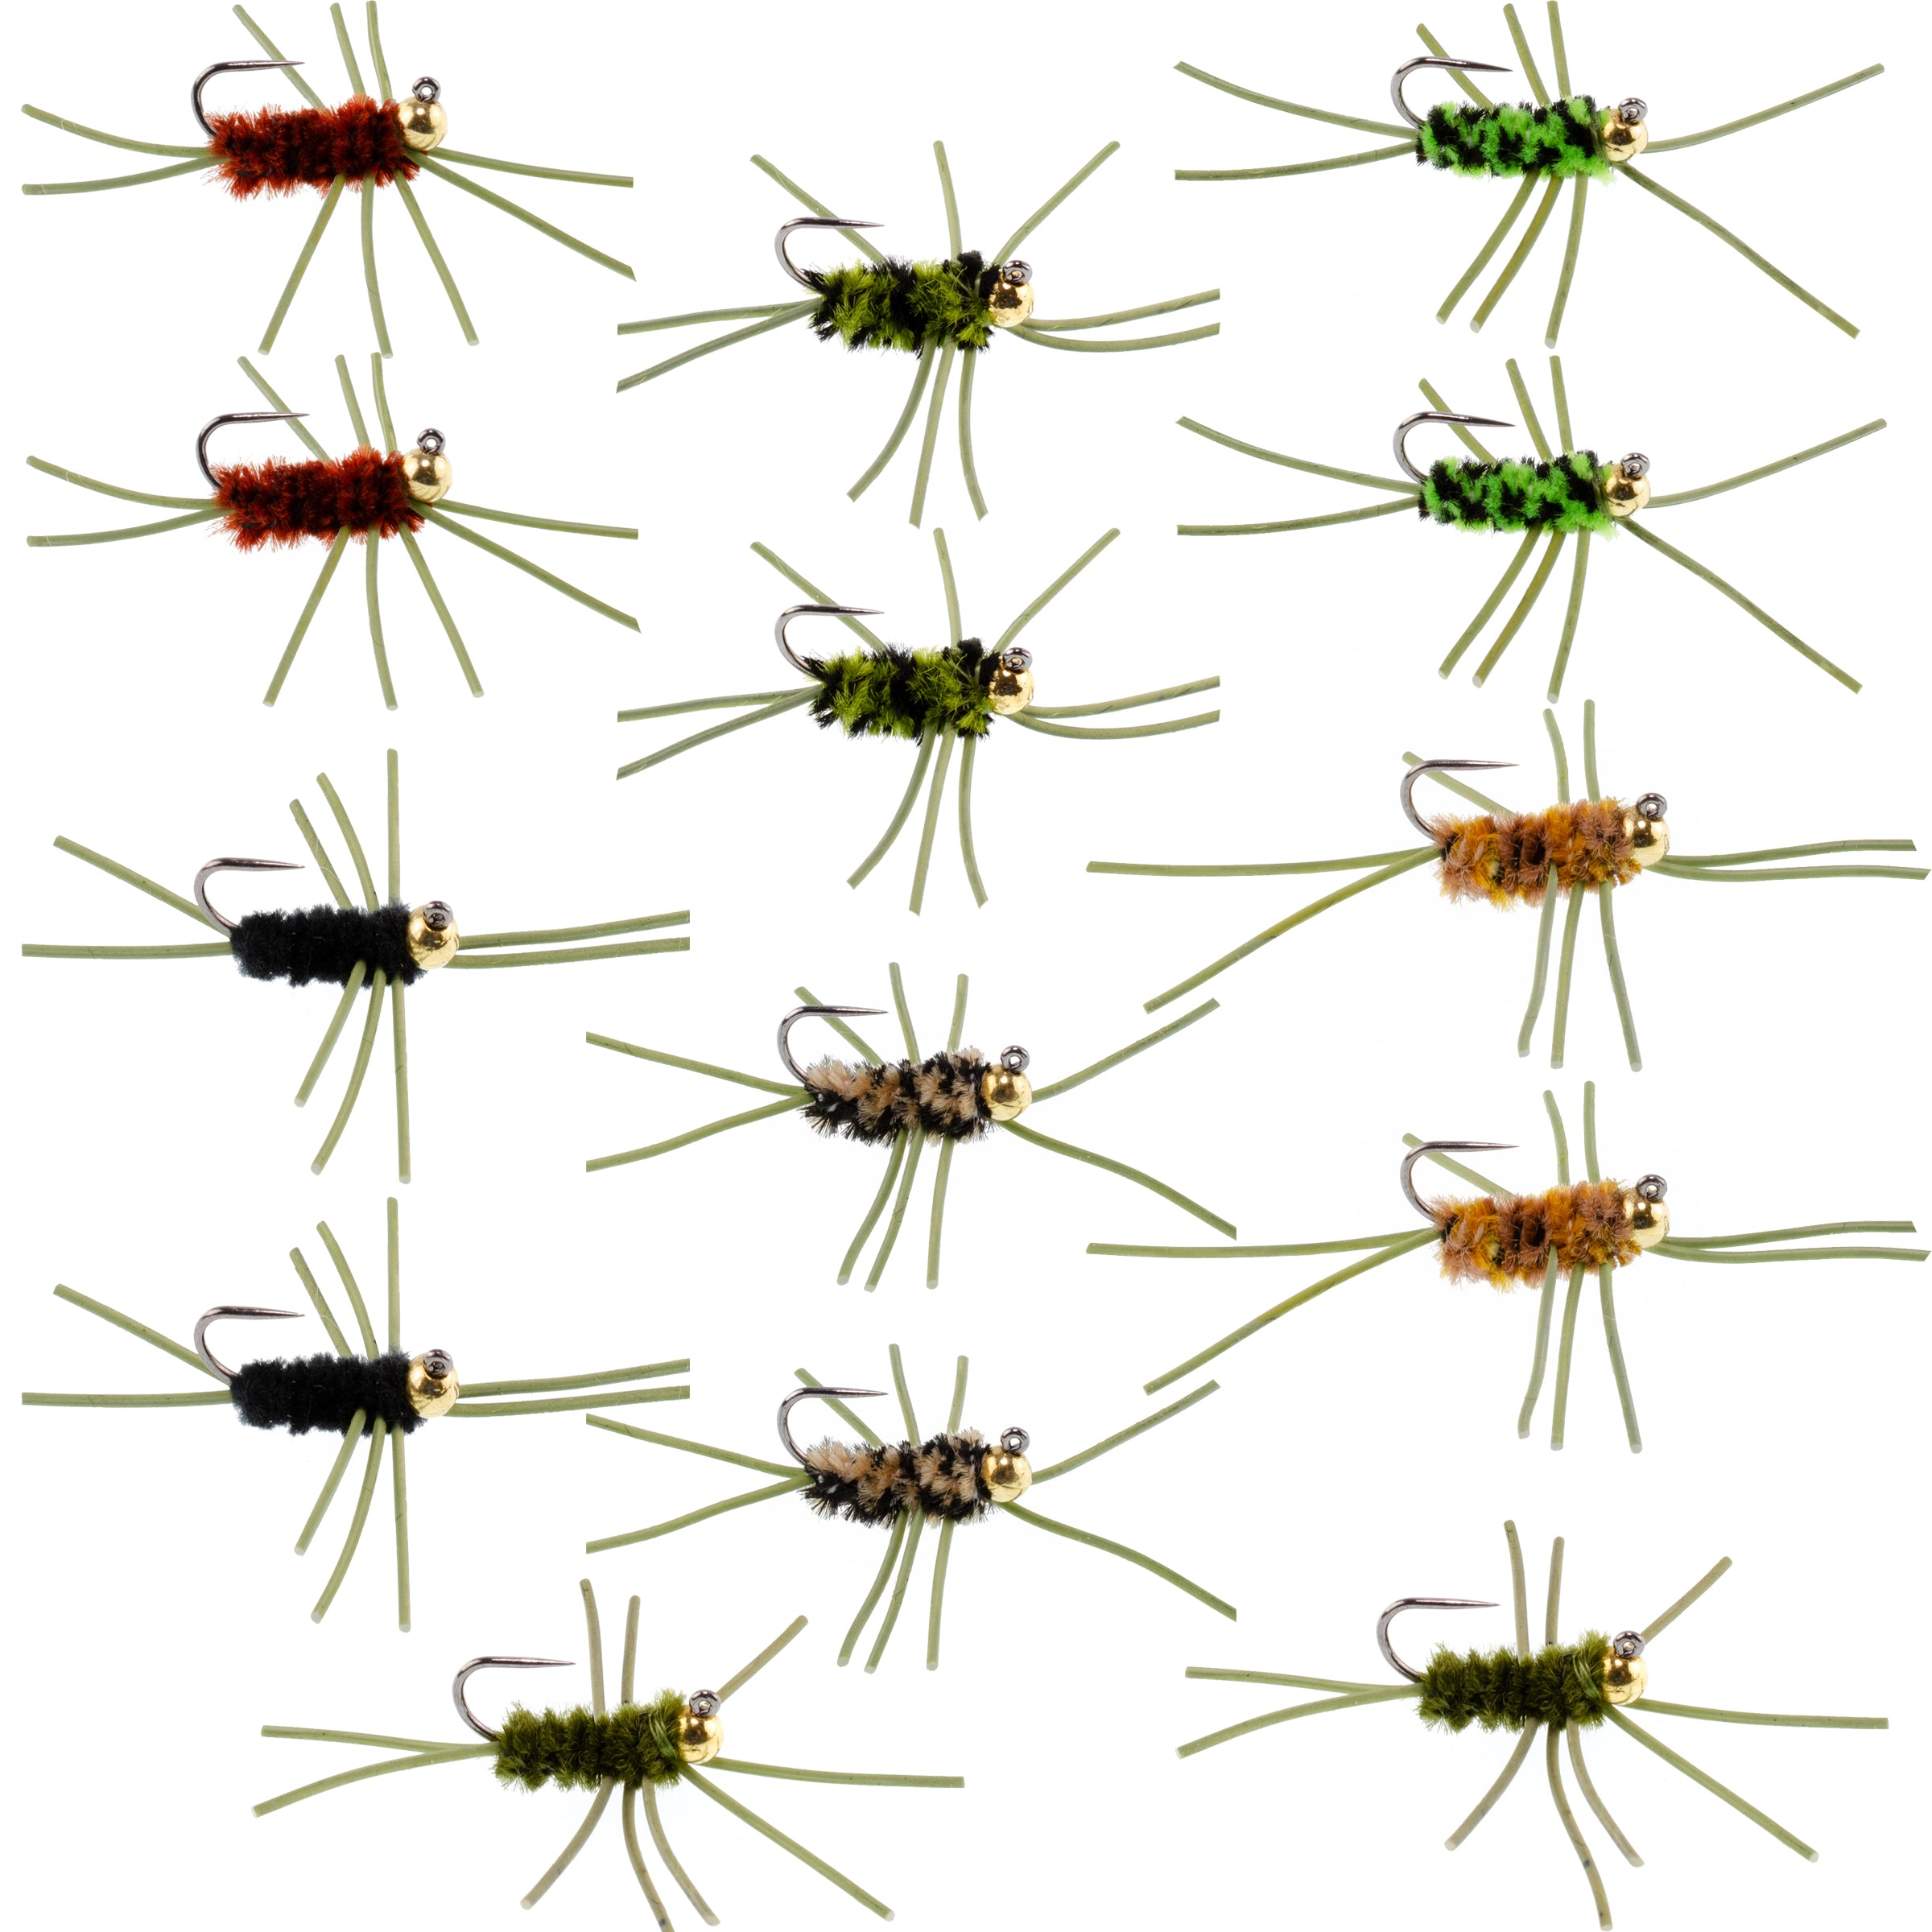 Tungsten Bead Jigged Pat's Rubber Legs Nymph Assortment Fly Fishing Flies - Trout and Bass Wet Fly Pattern - 14 Flies 7 Colors Hook Size 10